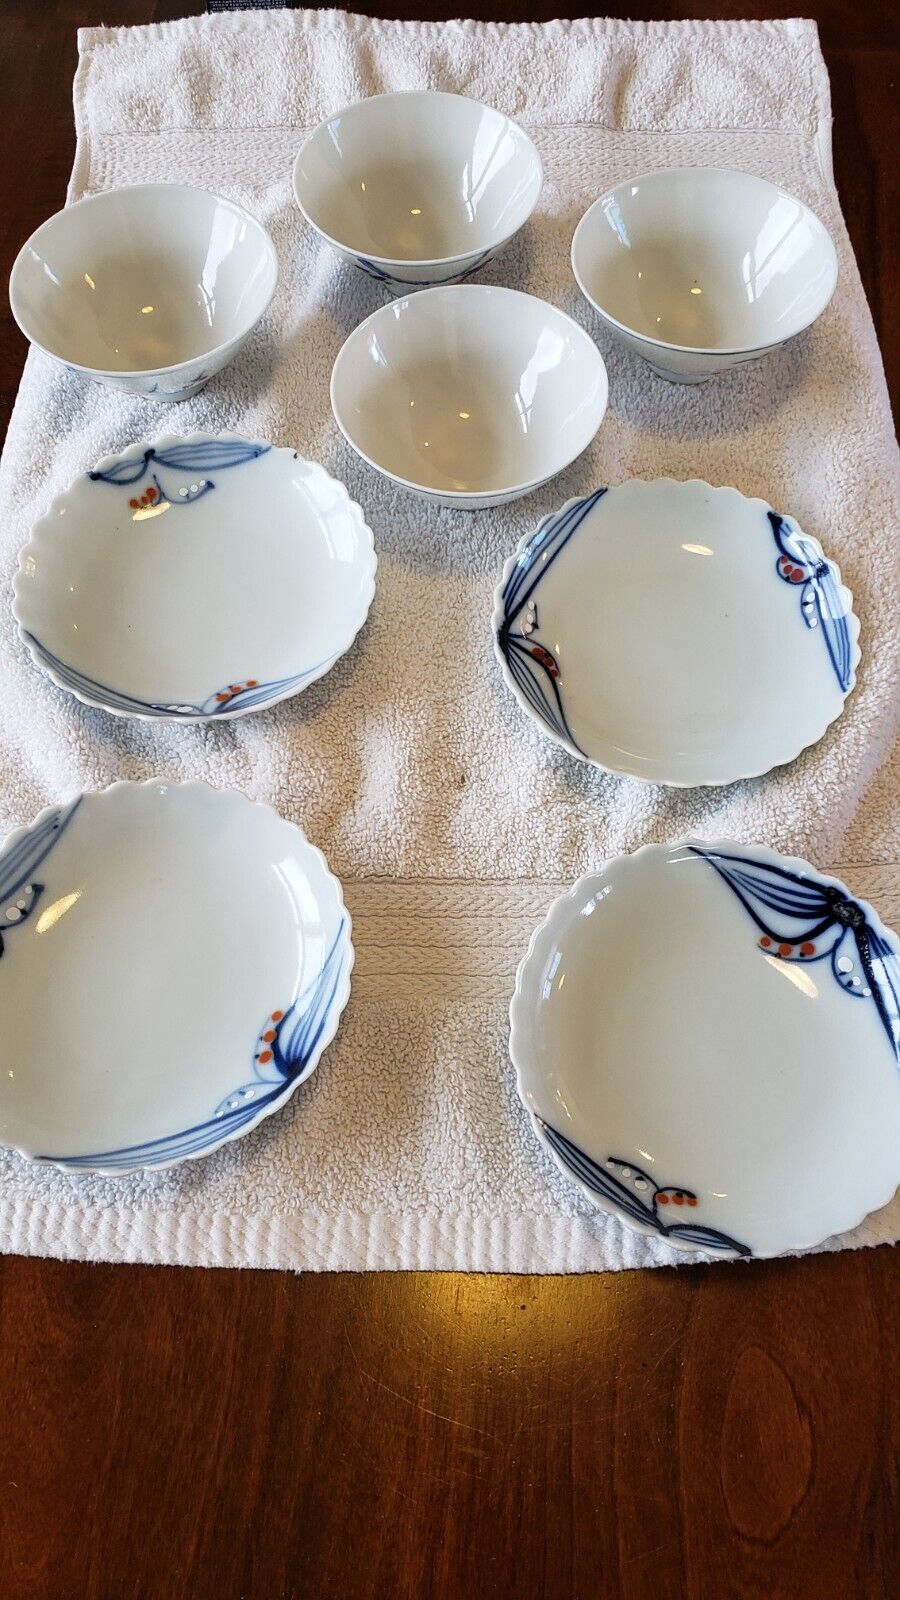 Four Vtg Footed Porcelain Japanese Rice Bowls textured handmade with four plates